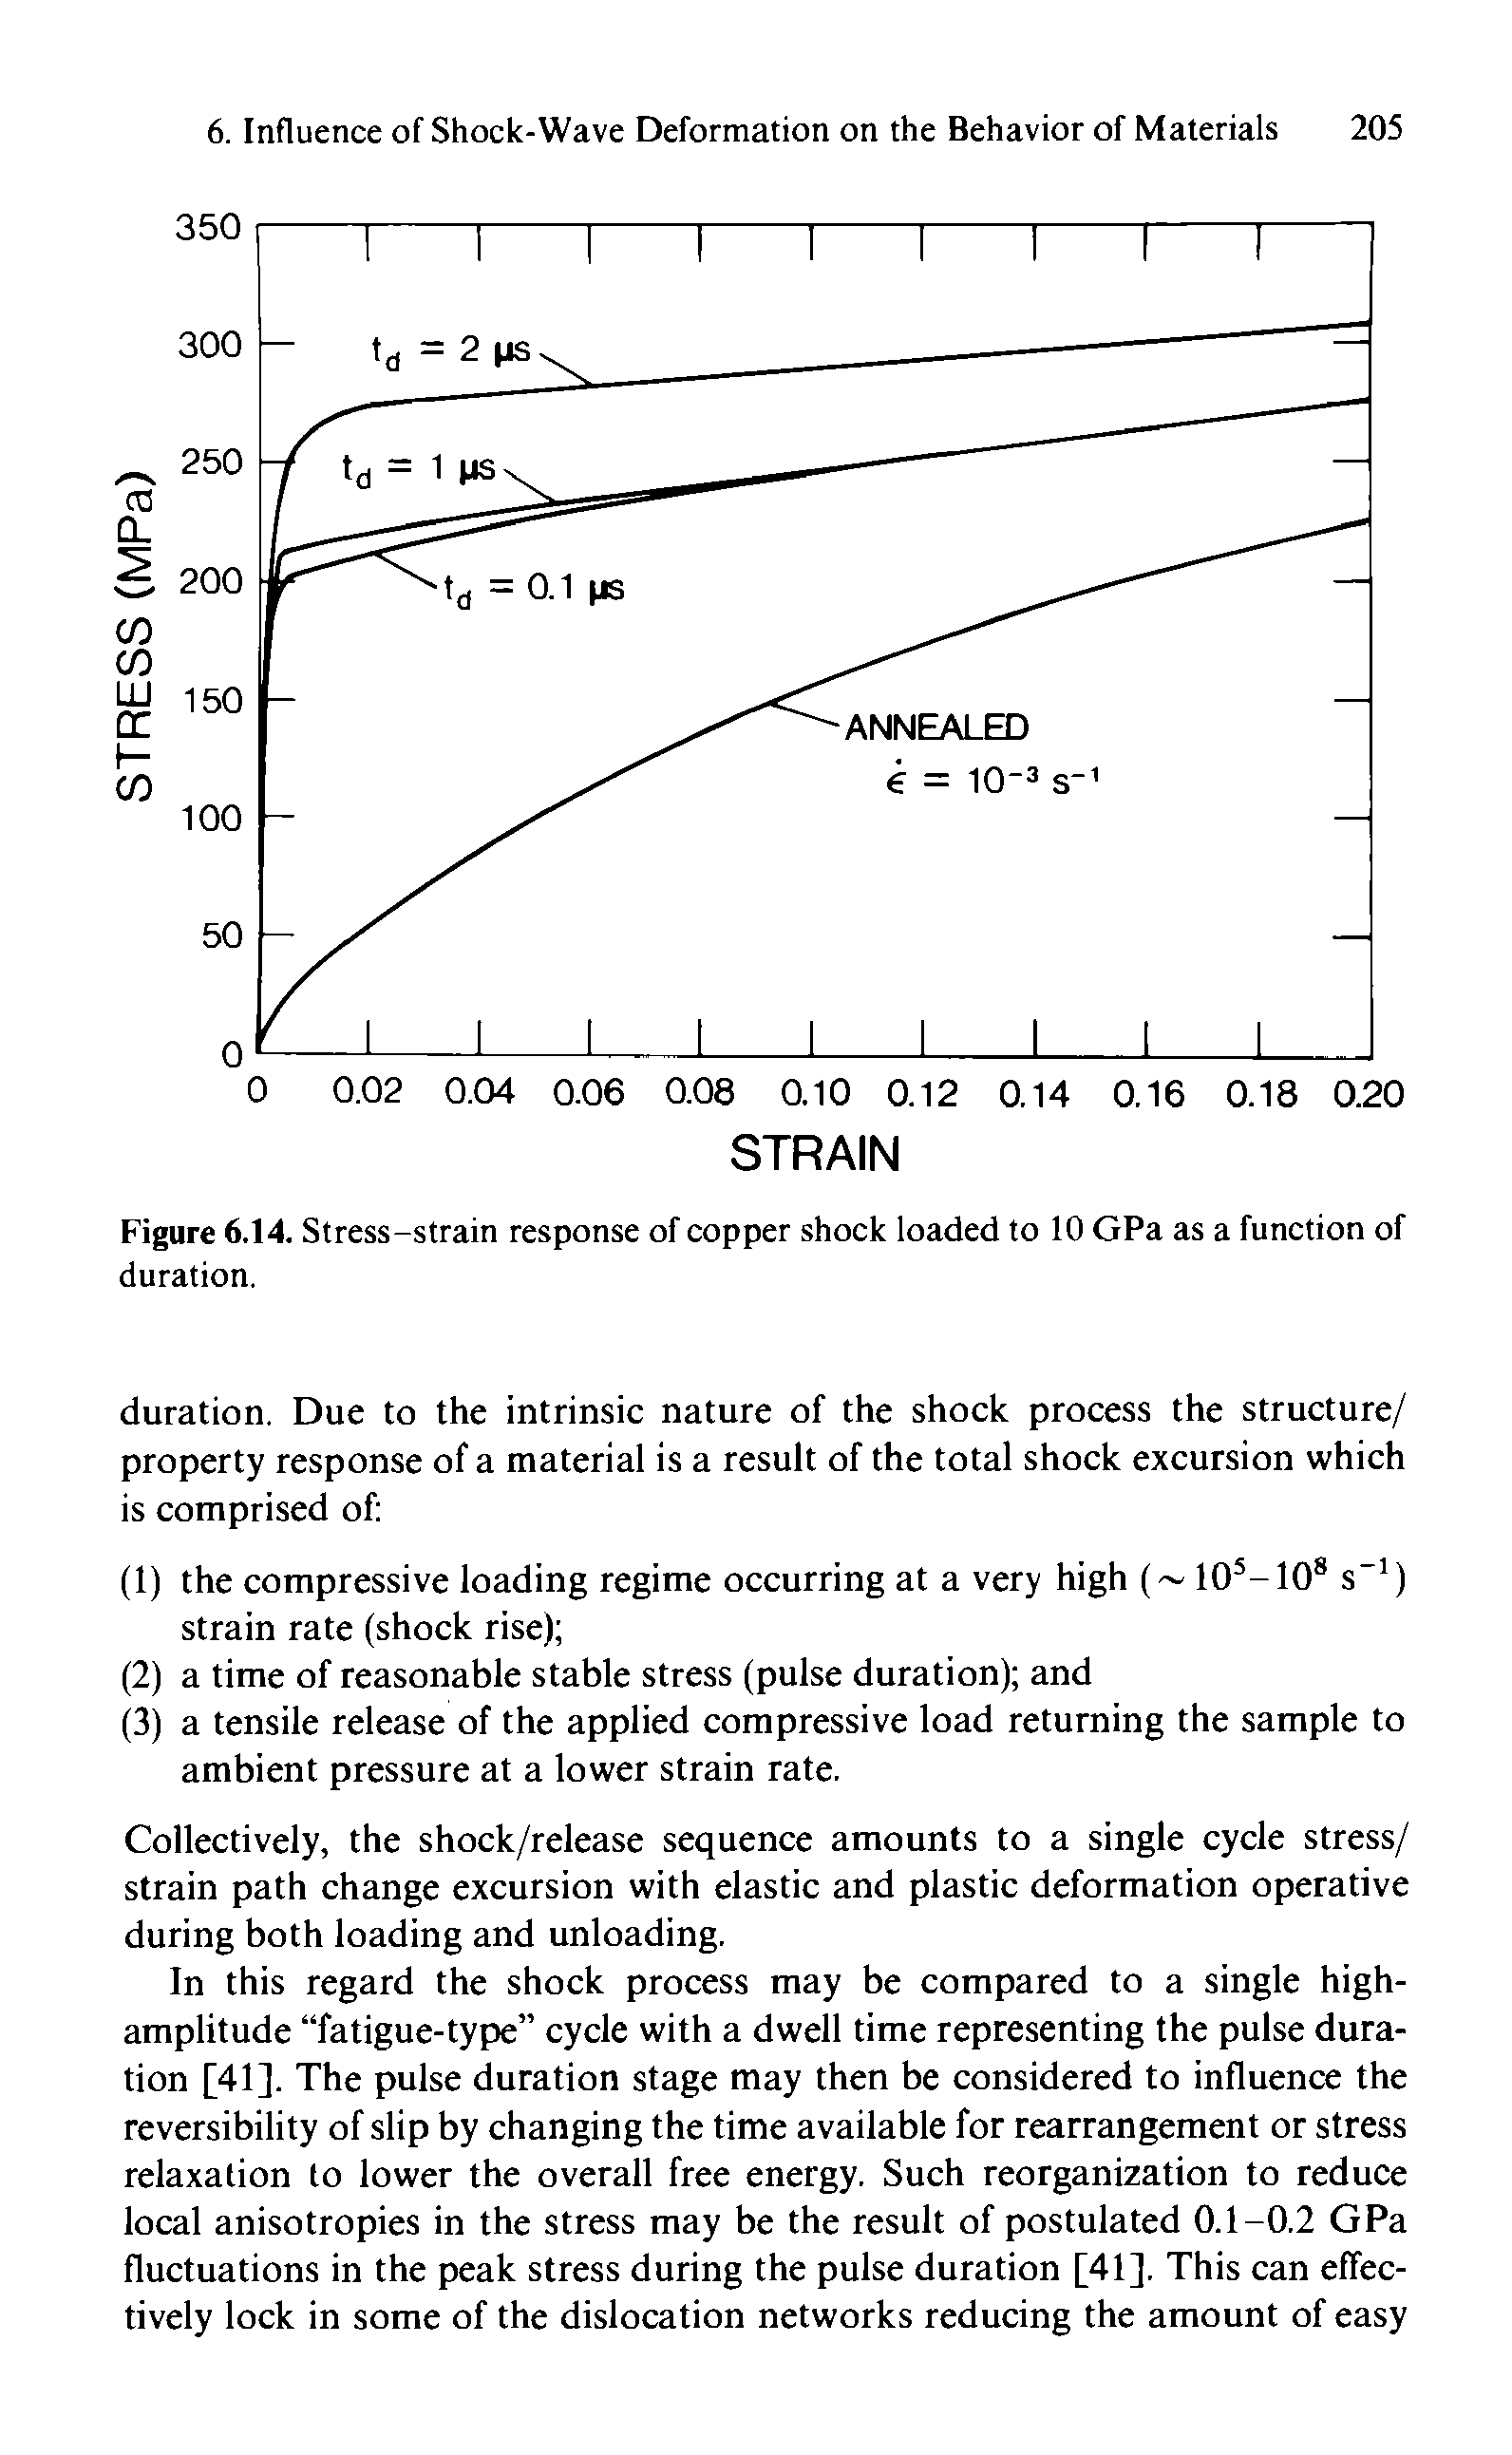 Figure 6.14. Stress-strain response of copper shock loaded to 10 GPa as a function of duration.